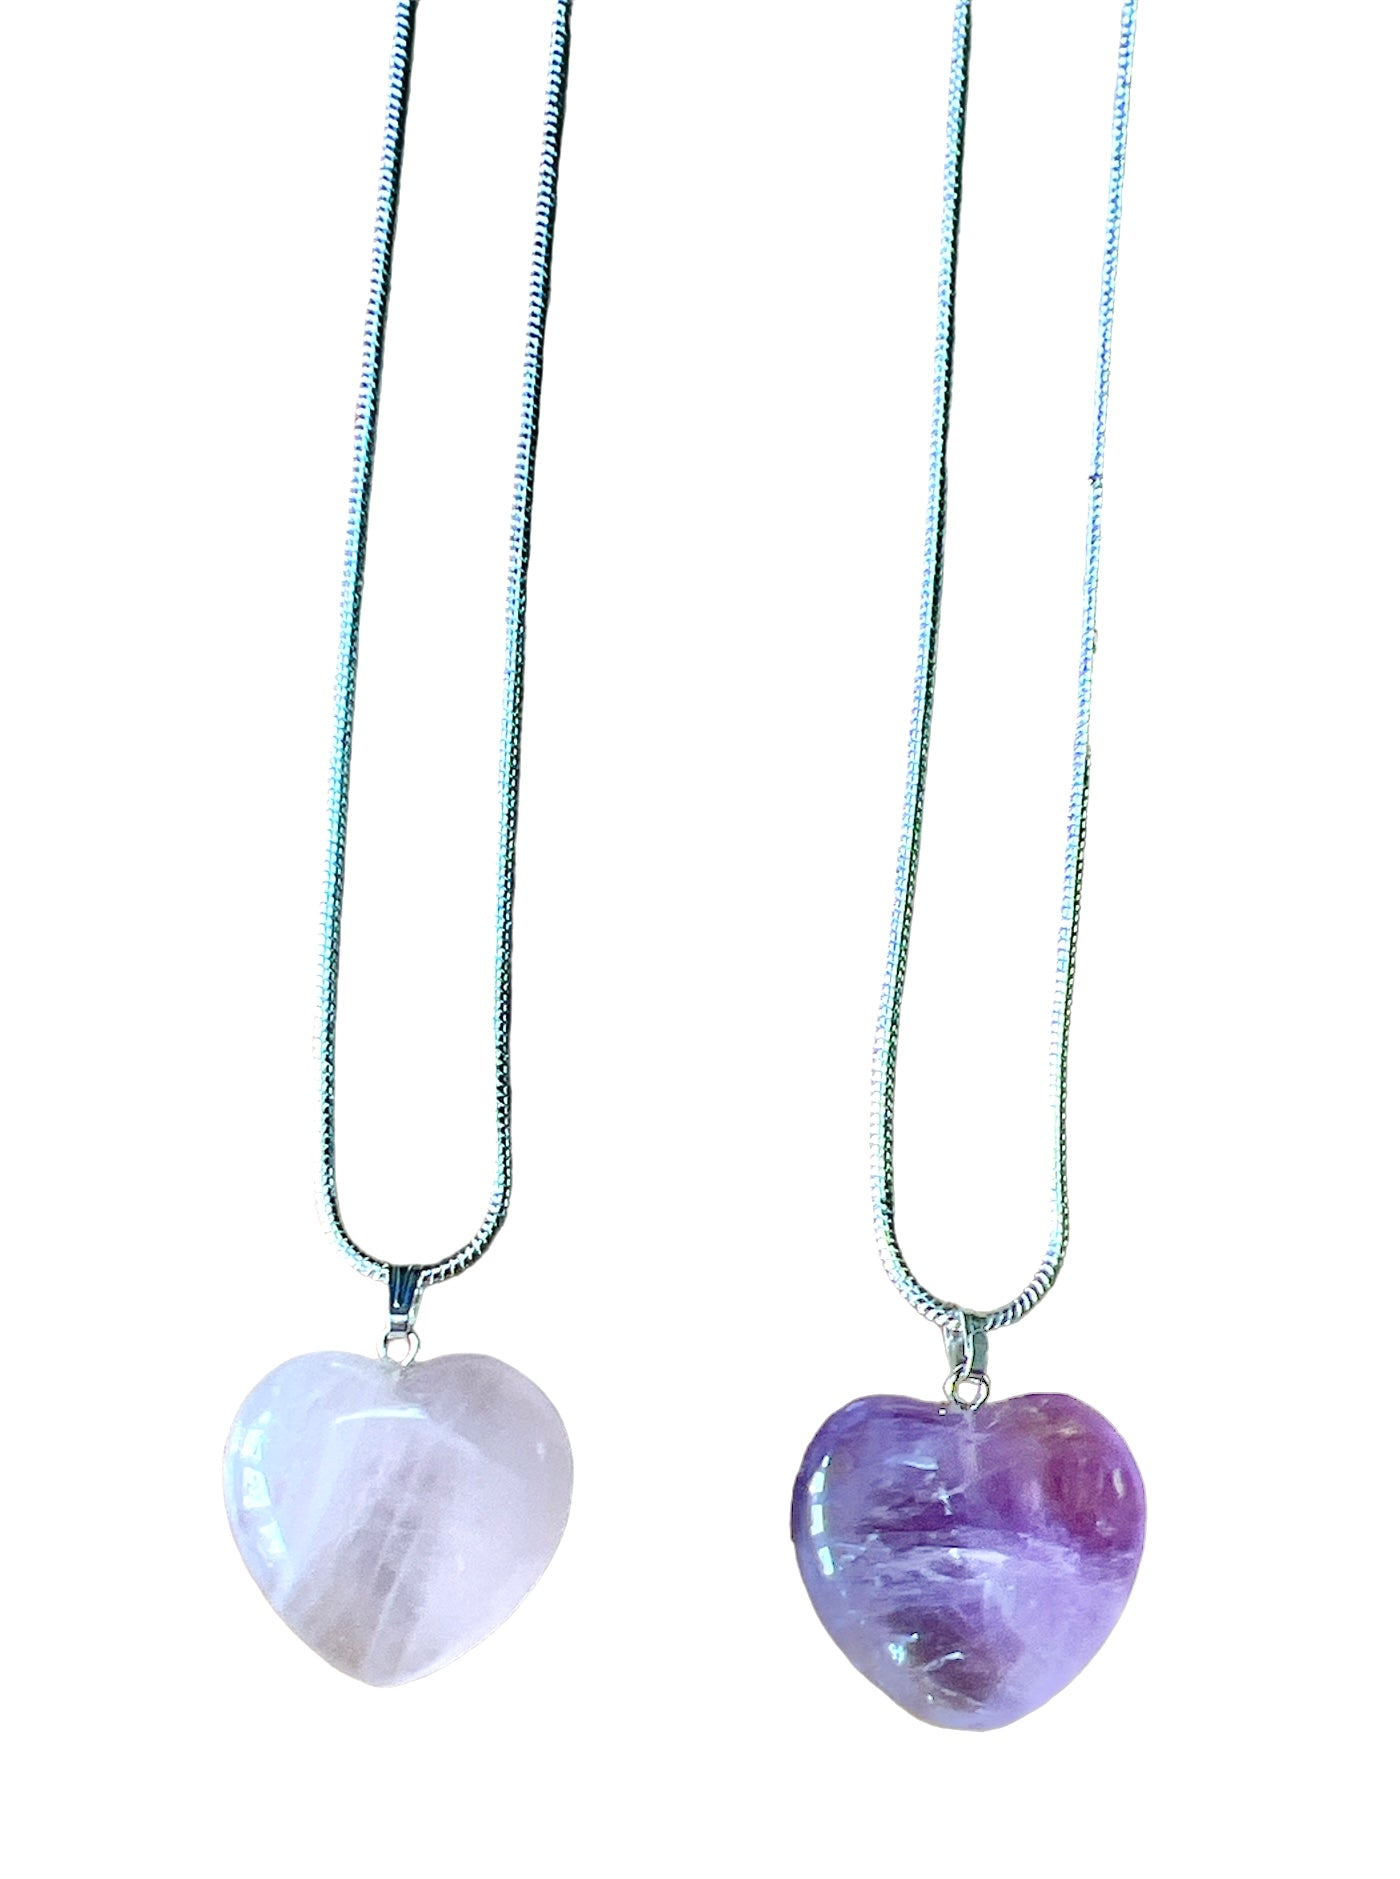 Puffed Heart Crystal Heart Shaped Pendant Necklace